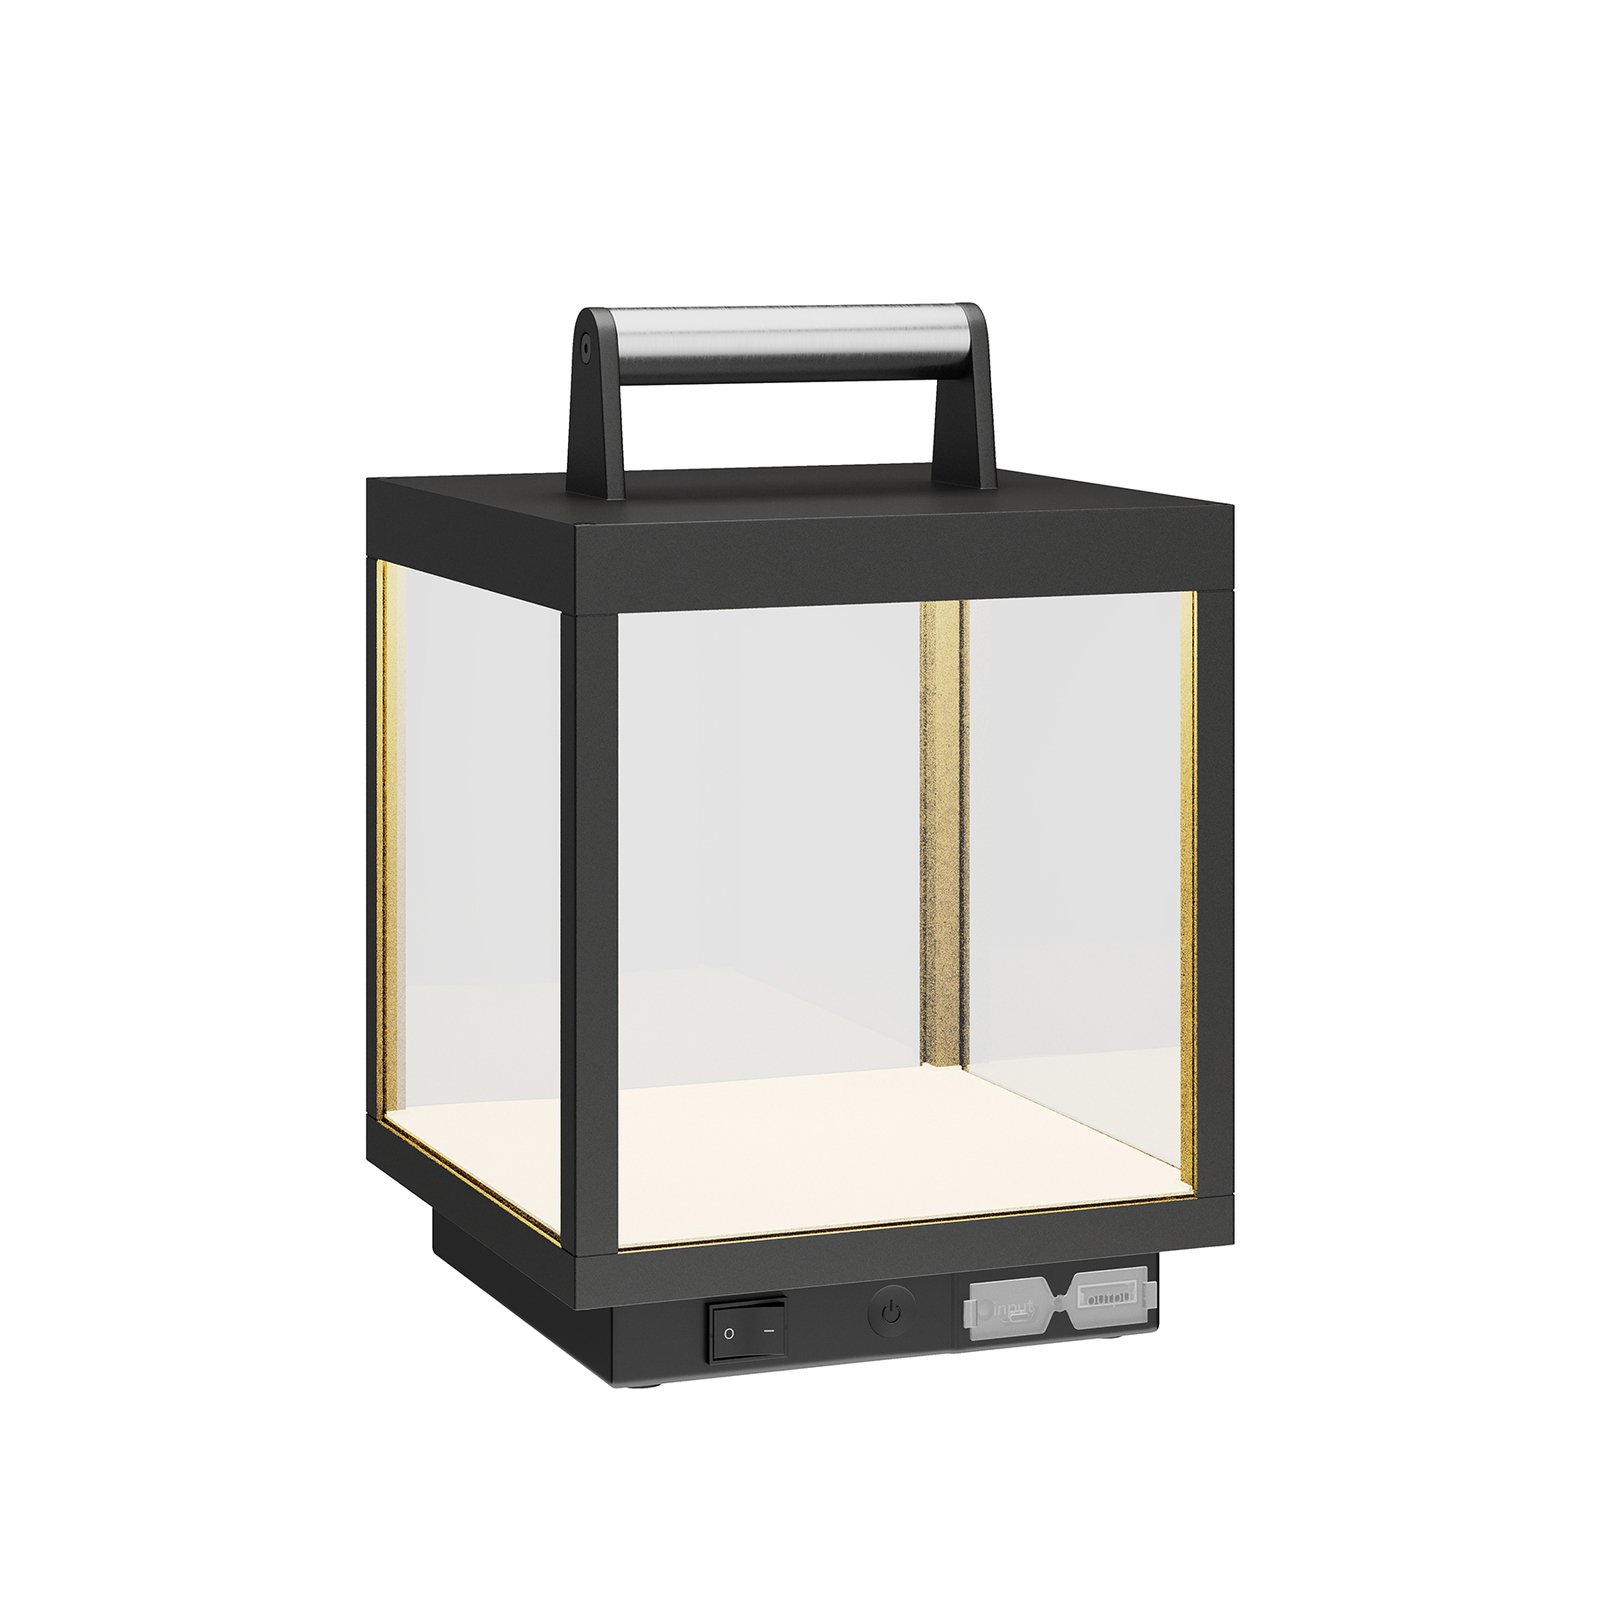 LED table lamp Cube for outdoors, rechargeable